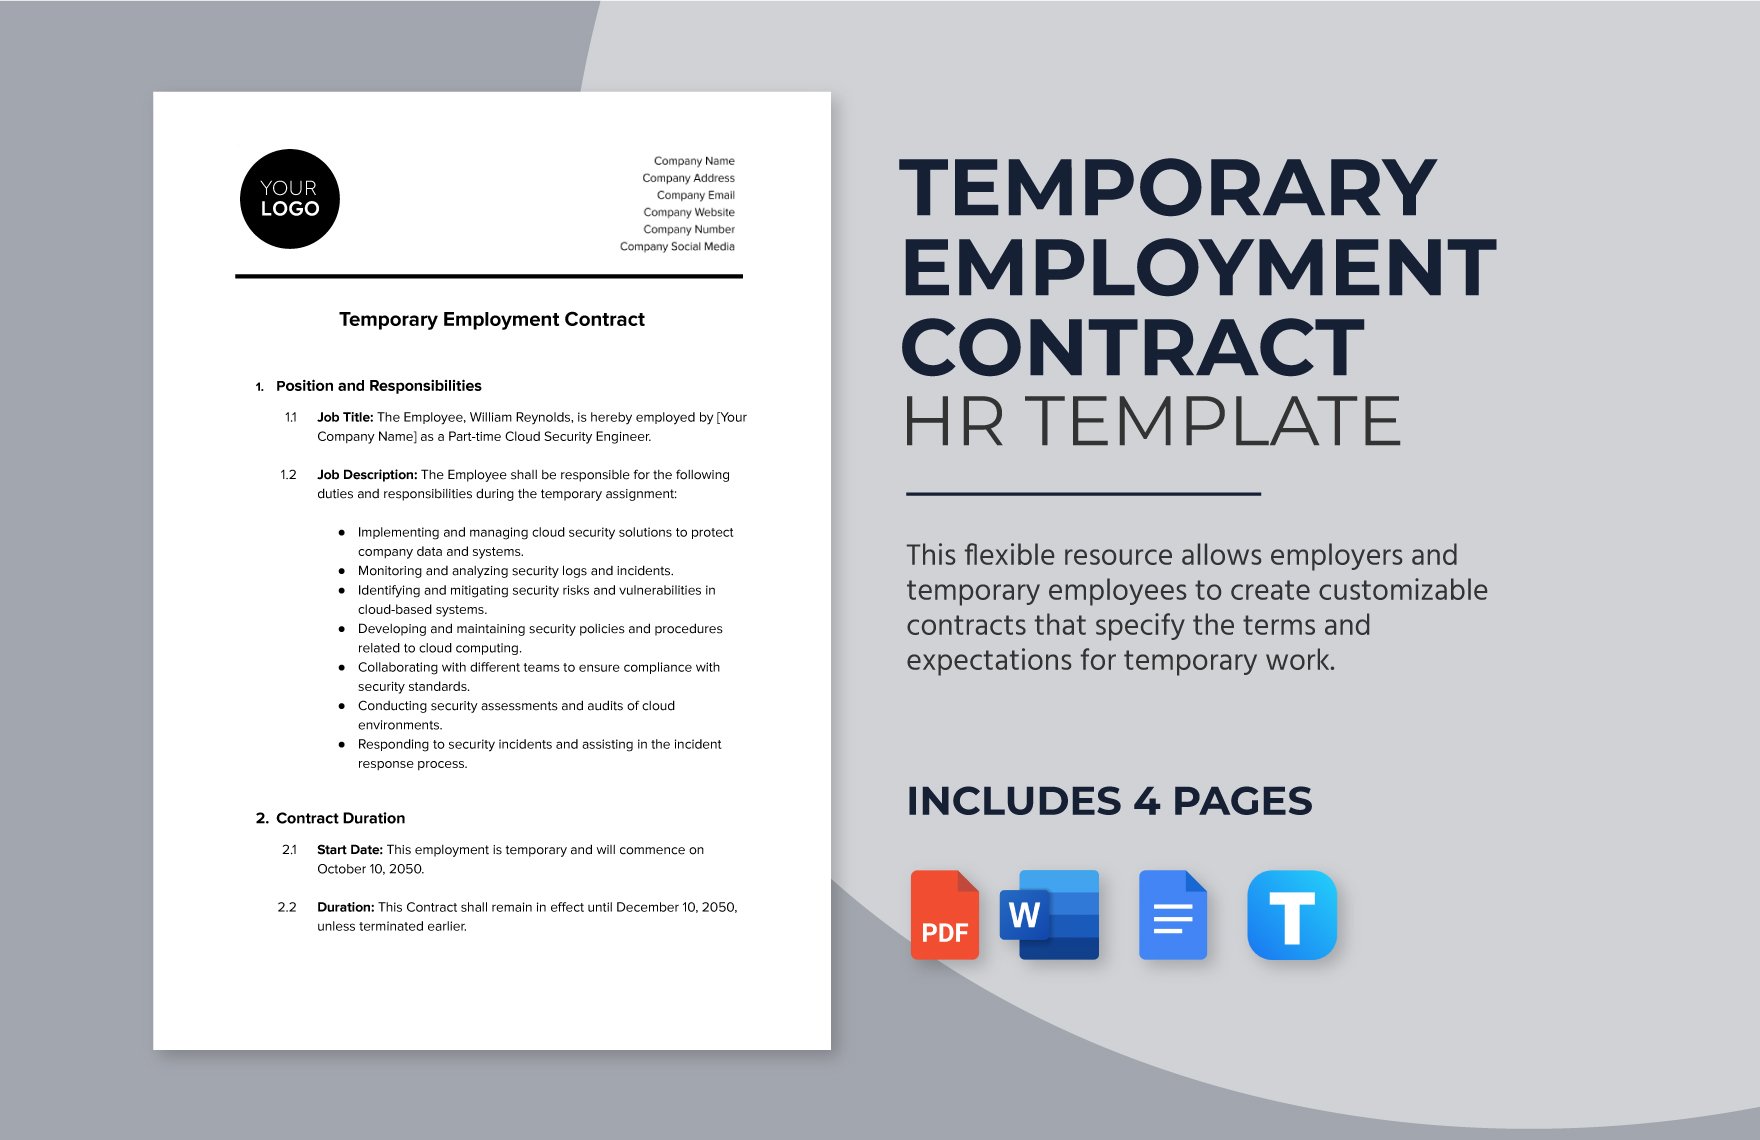 Temporary Employment Contract HR Template in Word, Google Docs, PDF